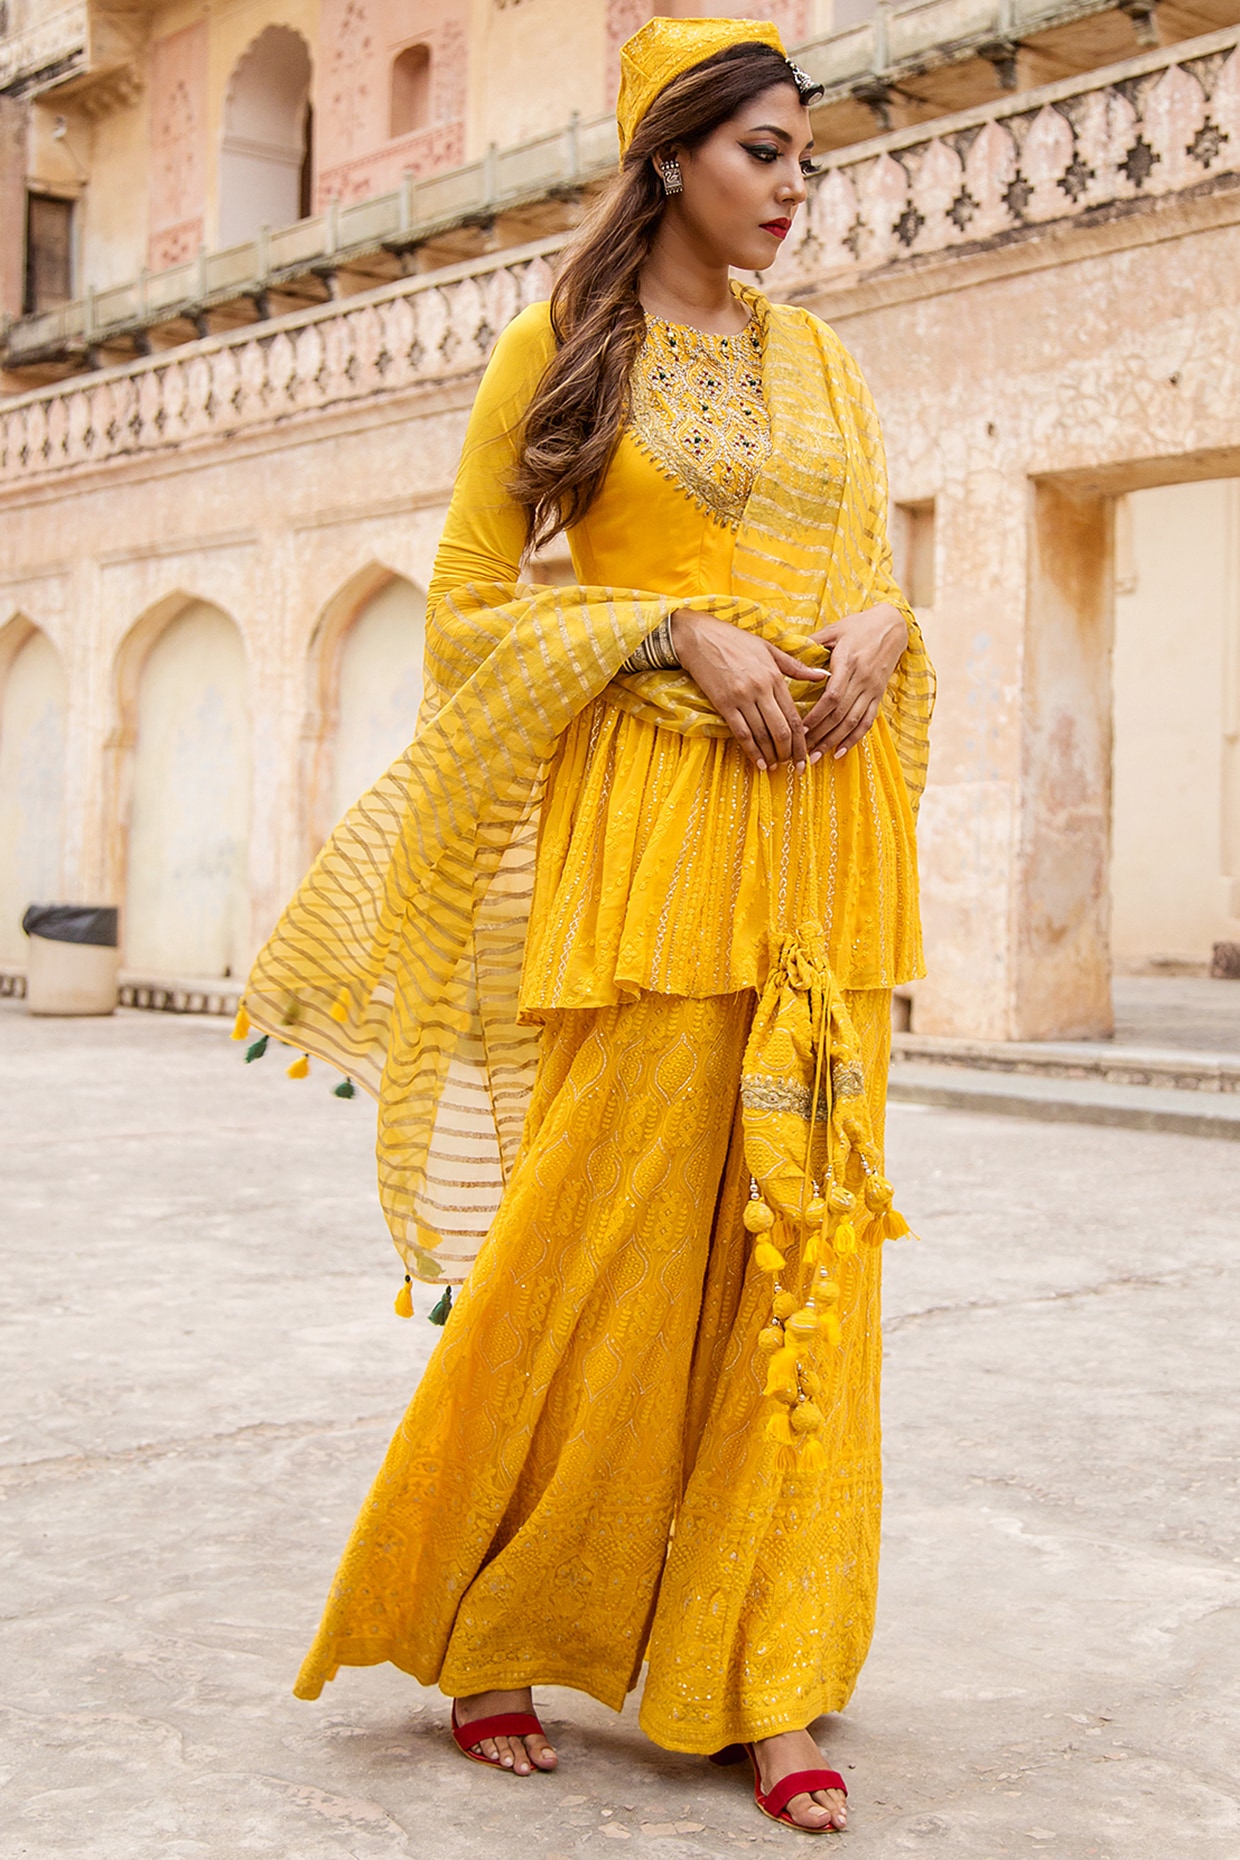 15 Trending Models of Palazzo Salwar Suits That Will Impress You!